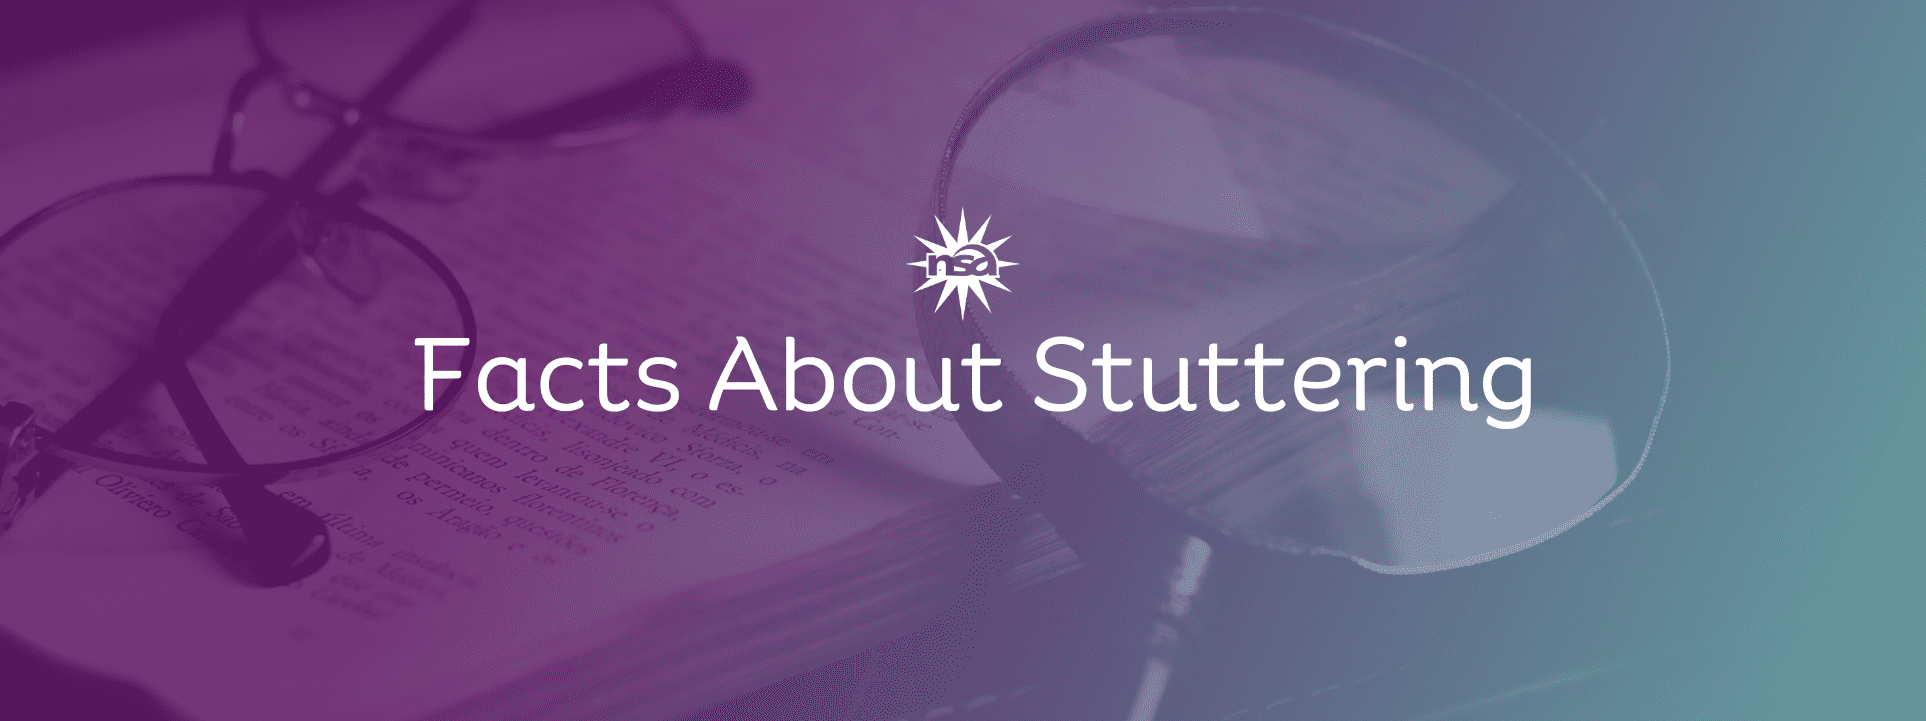 facts about stuttering banner